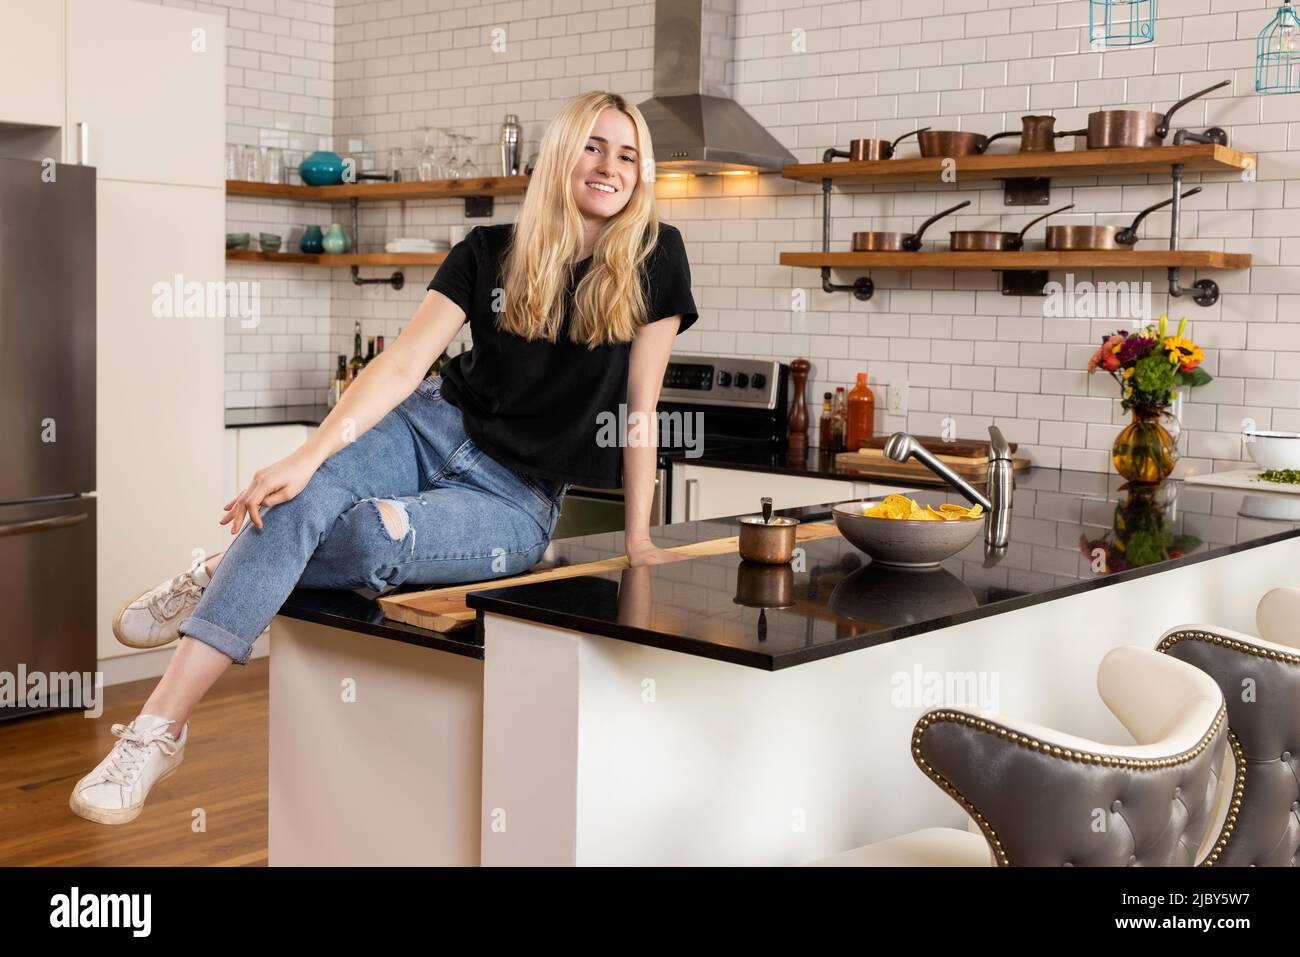 Portrait of smiling young Caucasian woman looking at camera smiling, while sitting on the countertop of her apartment kitchen. Stock Photo